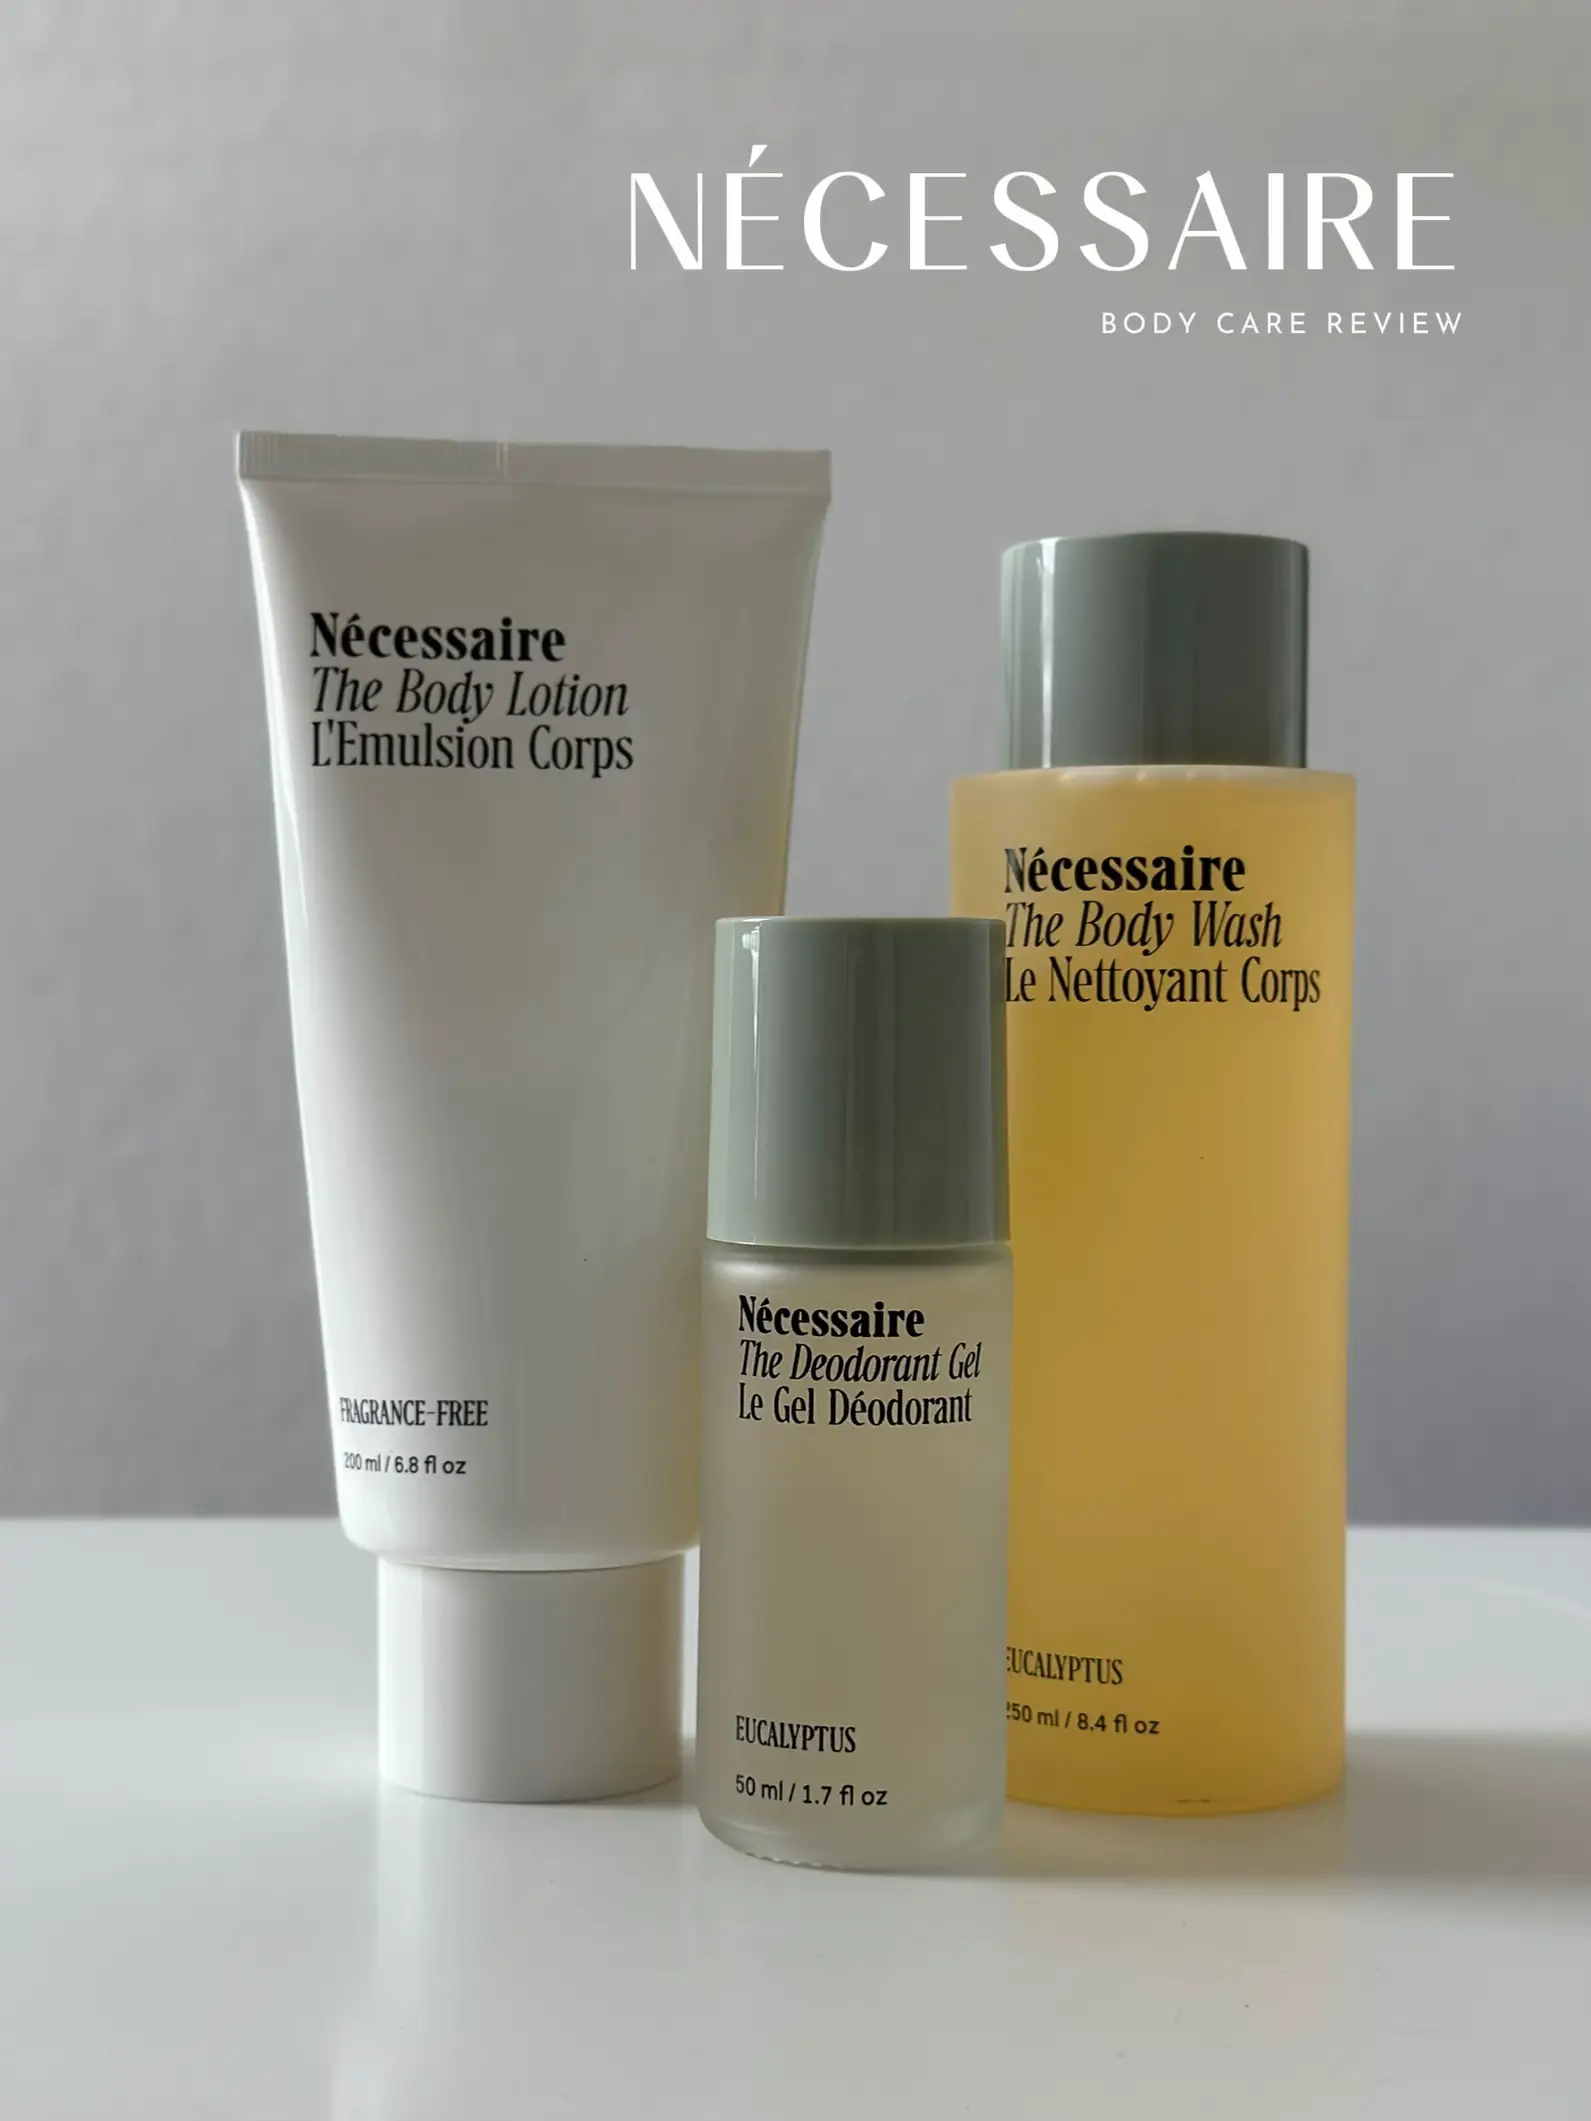 Necessaire body care review ✨, Gallery posted by Audrey